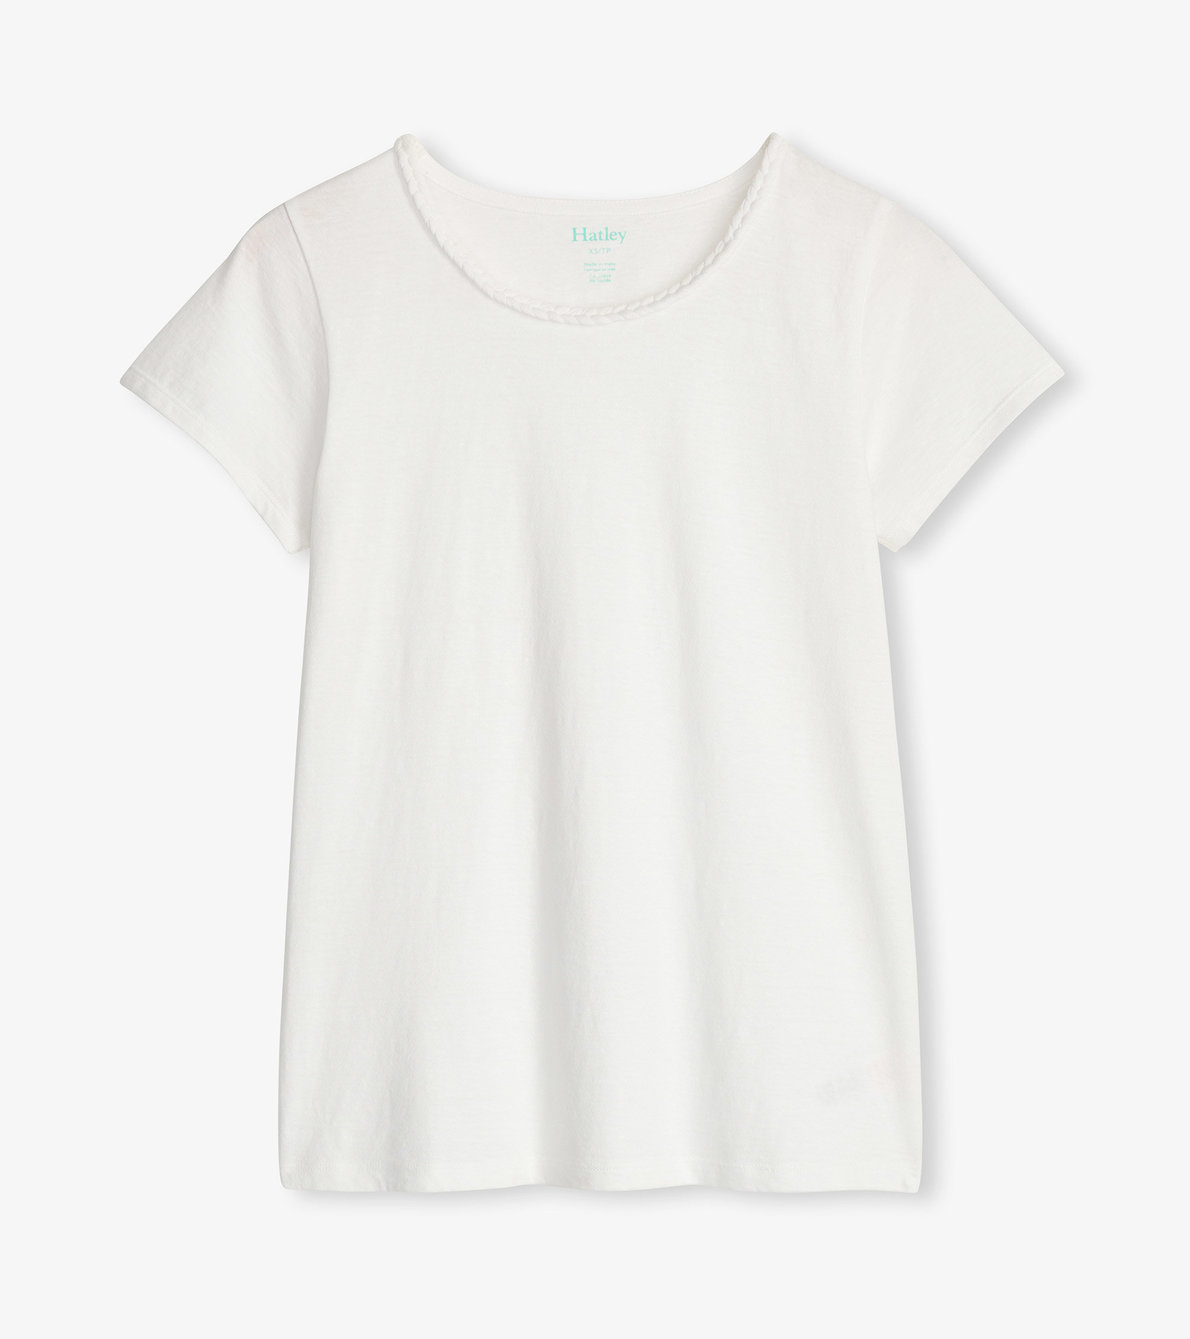 View larger image of Braided Neck Tee - White